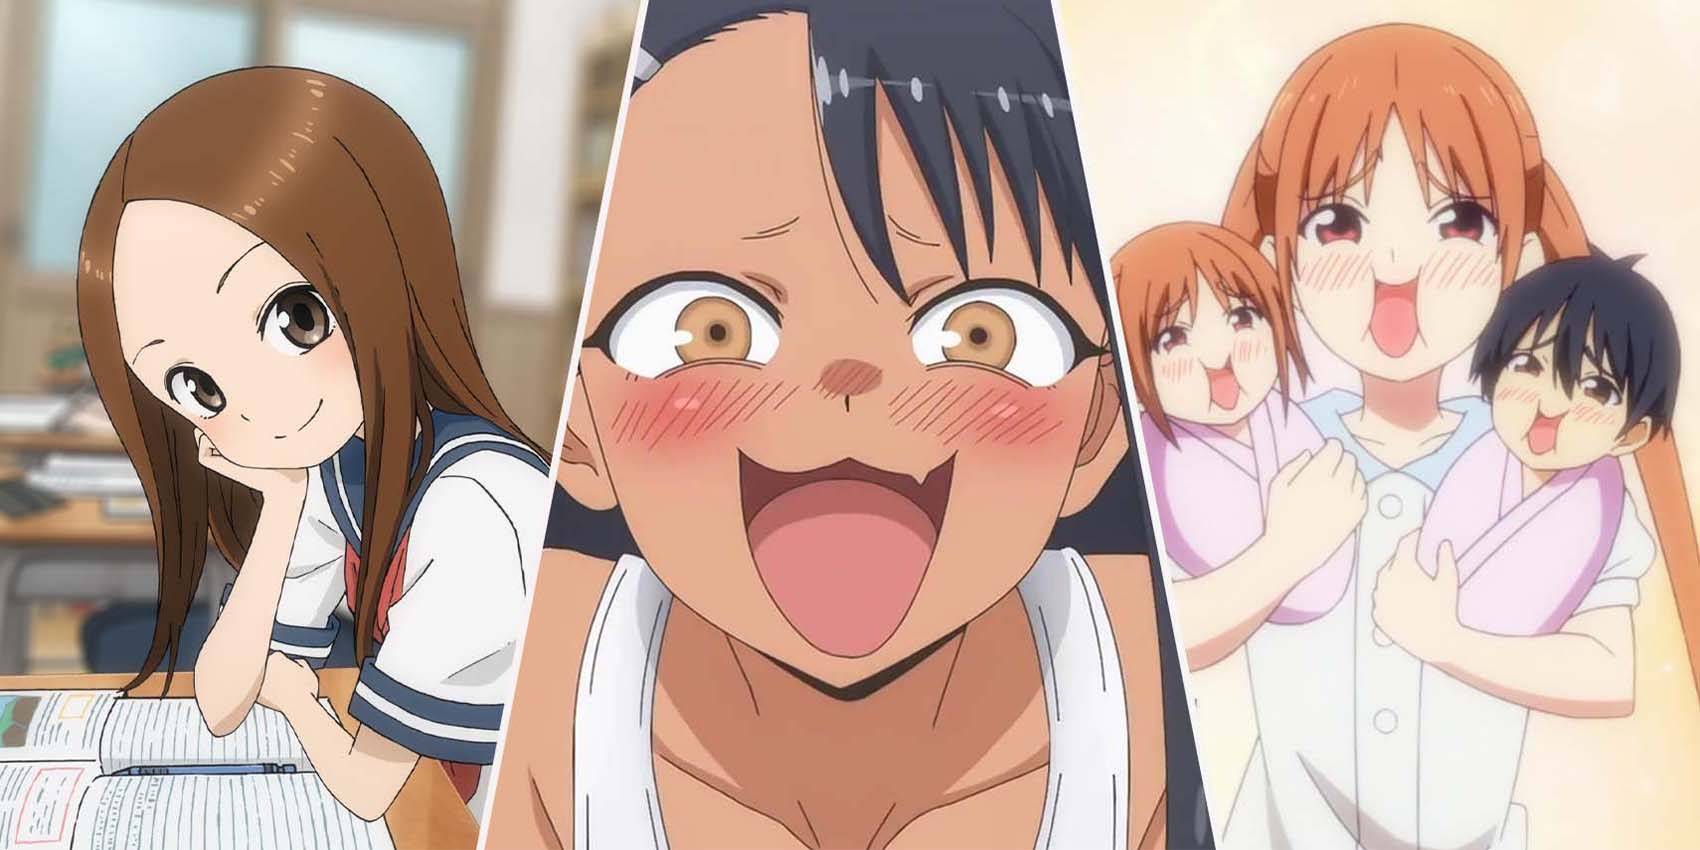 Animes like don't toy with me miss nagatoro